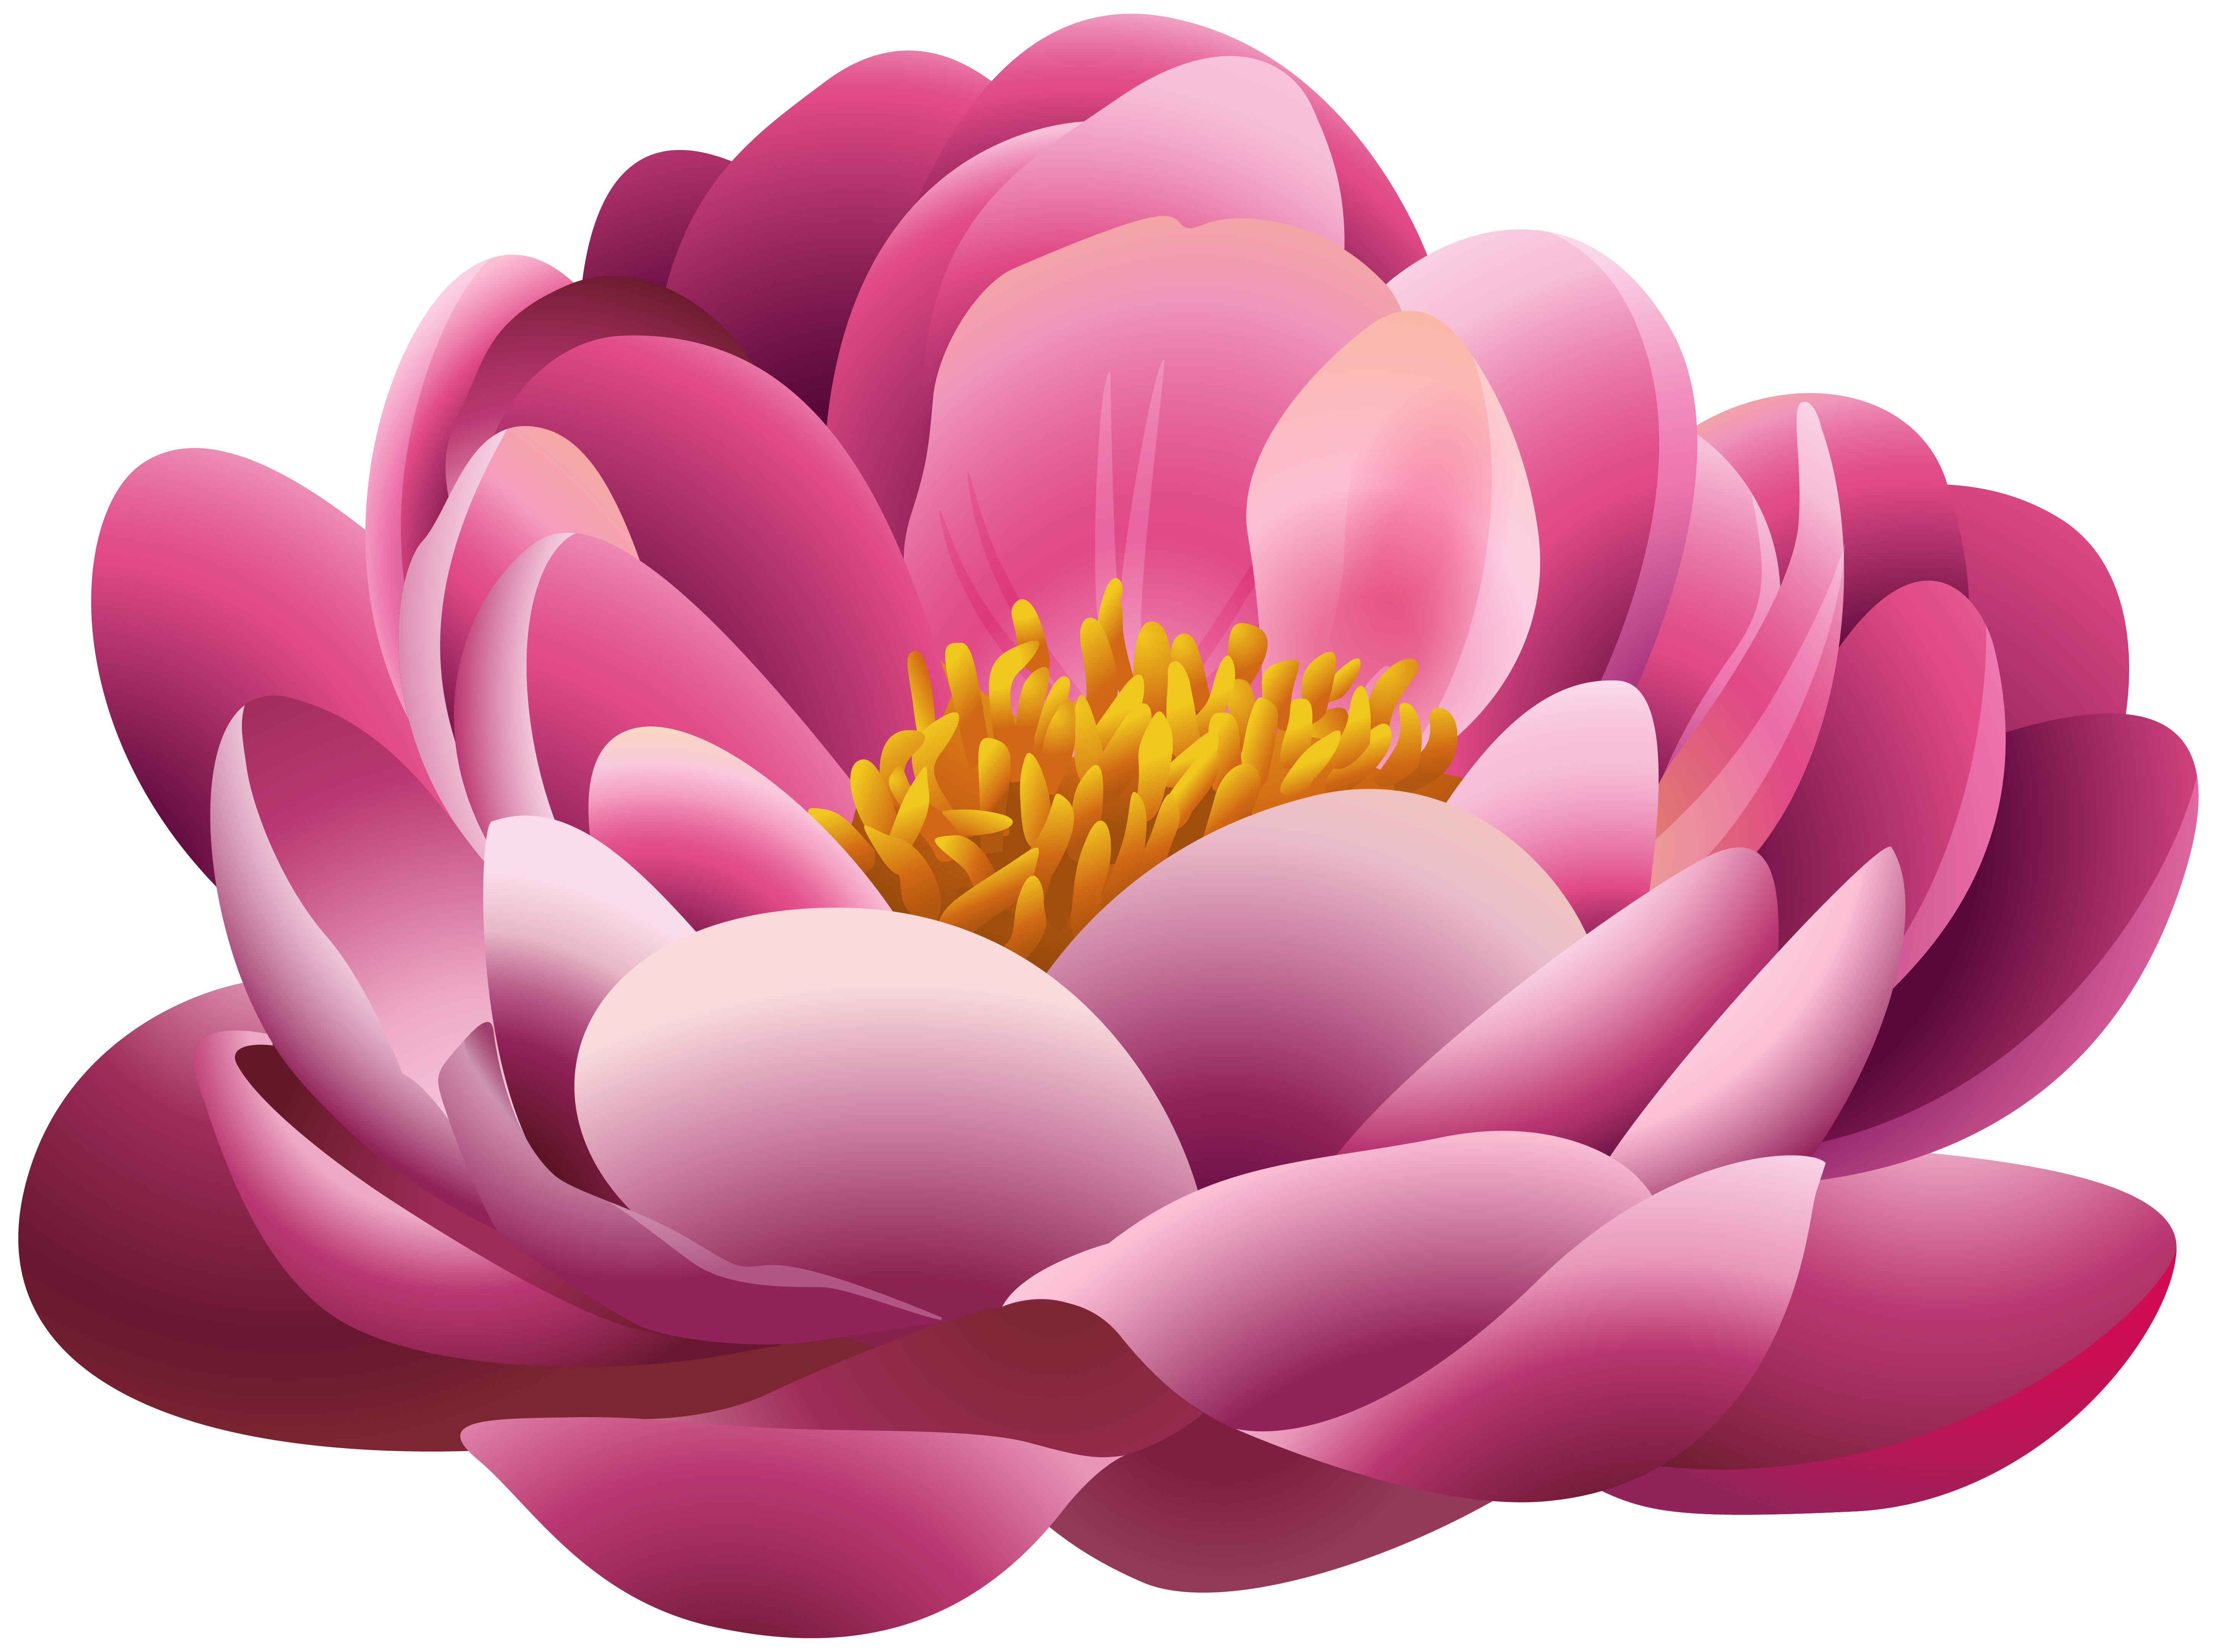 Flower clipart pretty flower. Beautiful pink png image